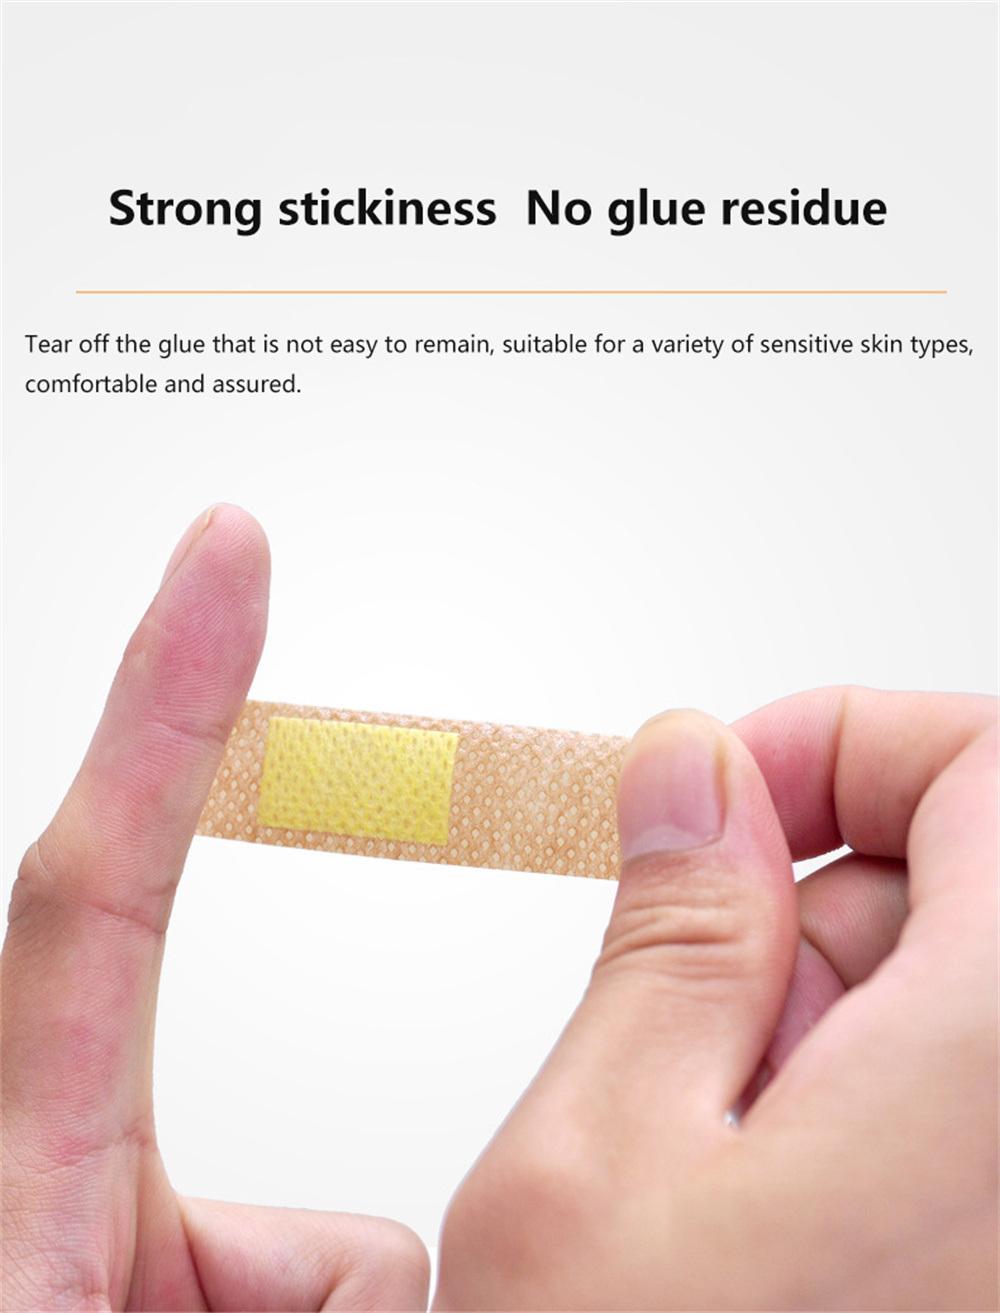 Wound Plaster Adhesive Waterproof Plastic Band-Aid Wound Dressing